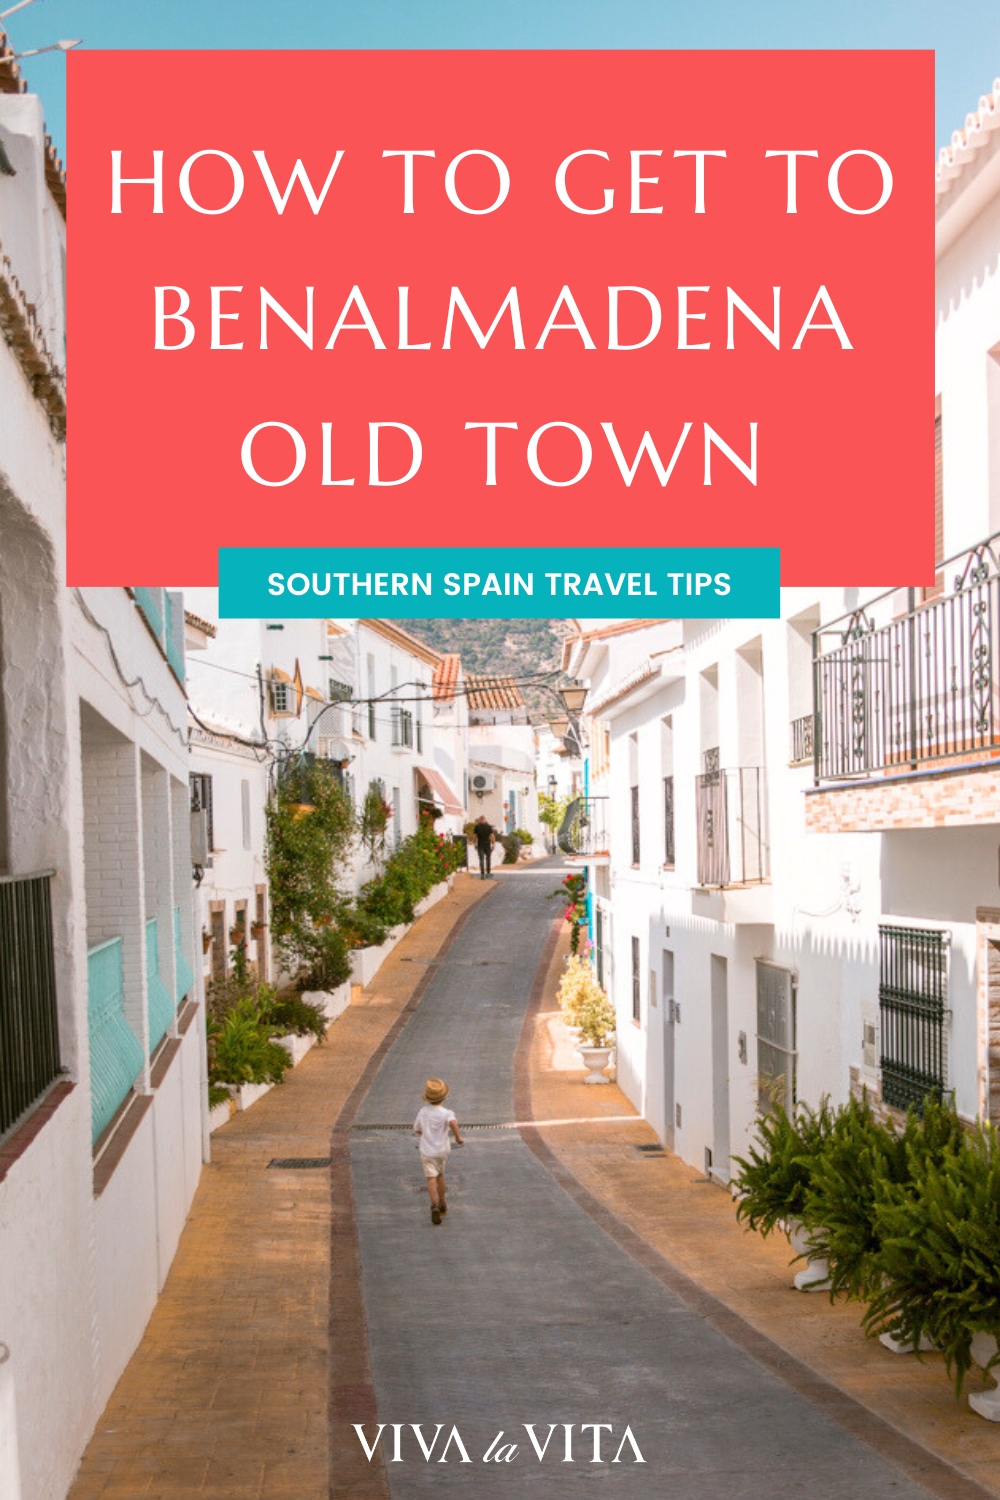 pinterest image showing a street in benalmadena pueblo, with a headline: how to get to benalmadena old town, southern spain travel tips